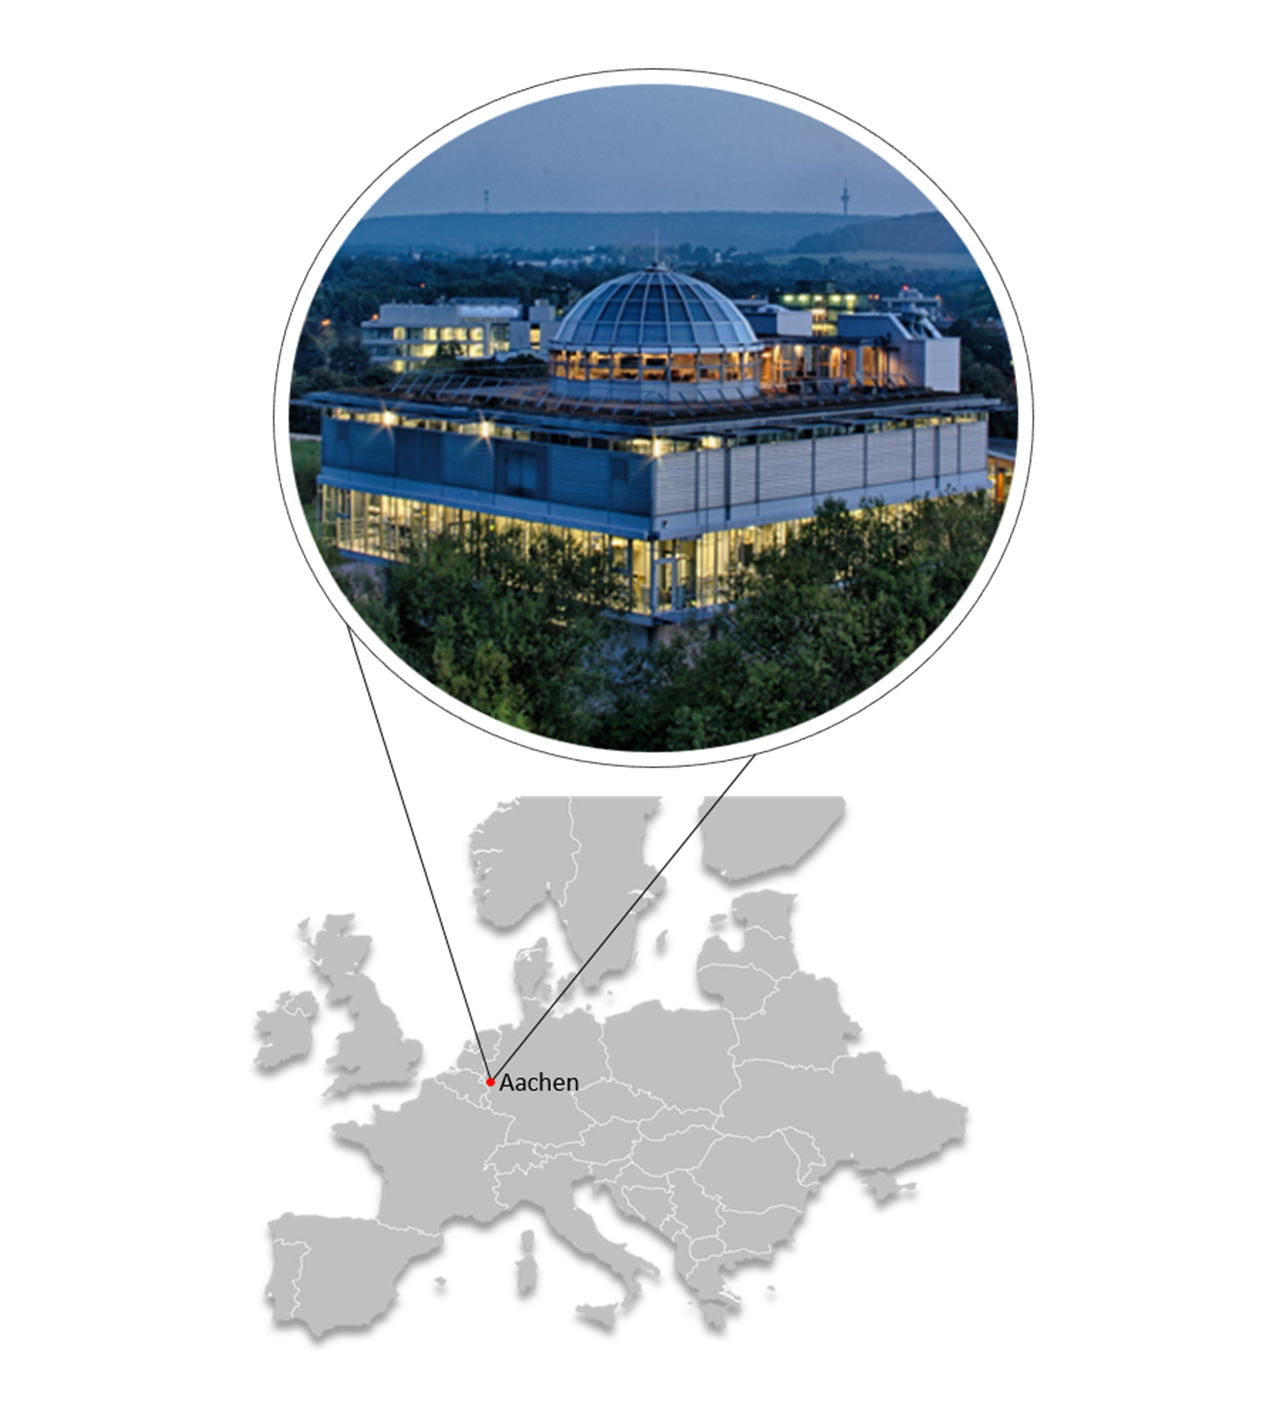 Map of Europe with Aachen called out with an image of the AMO building